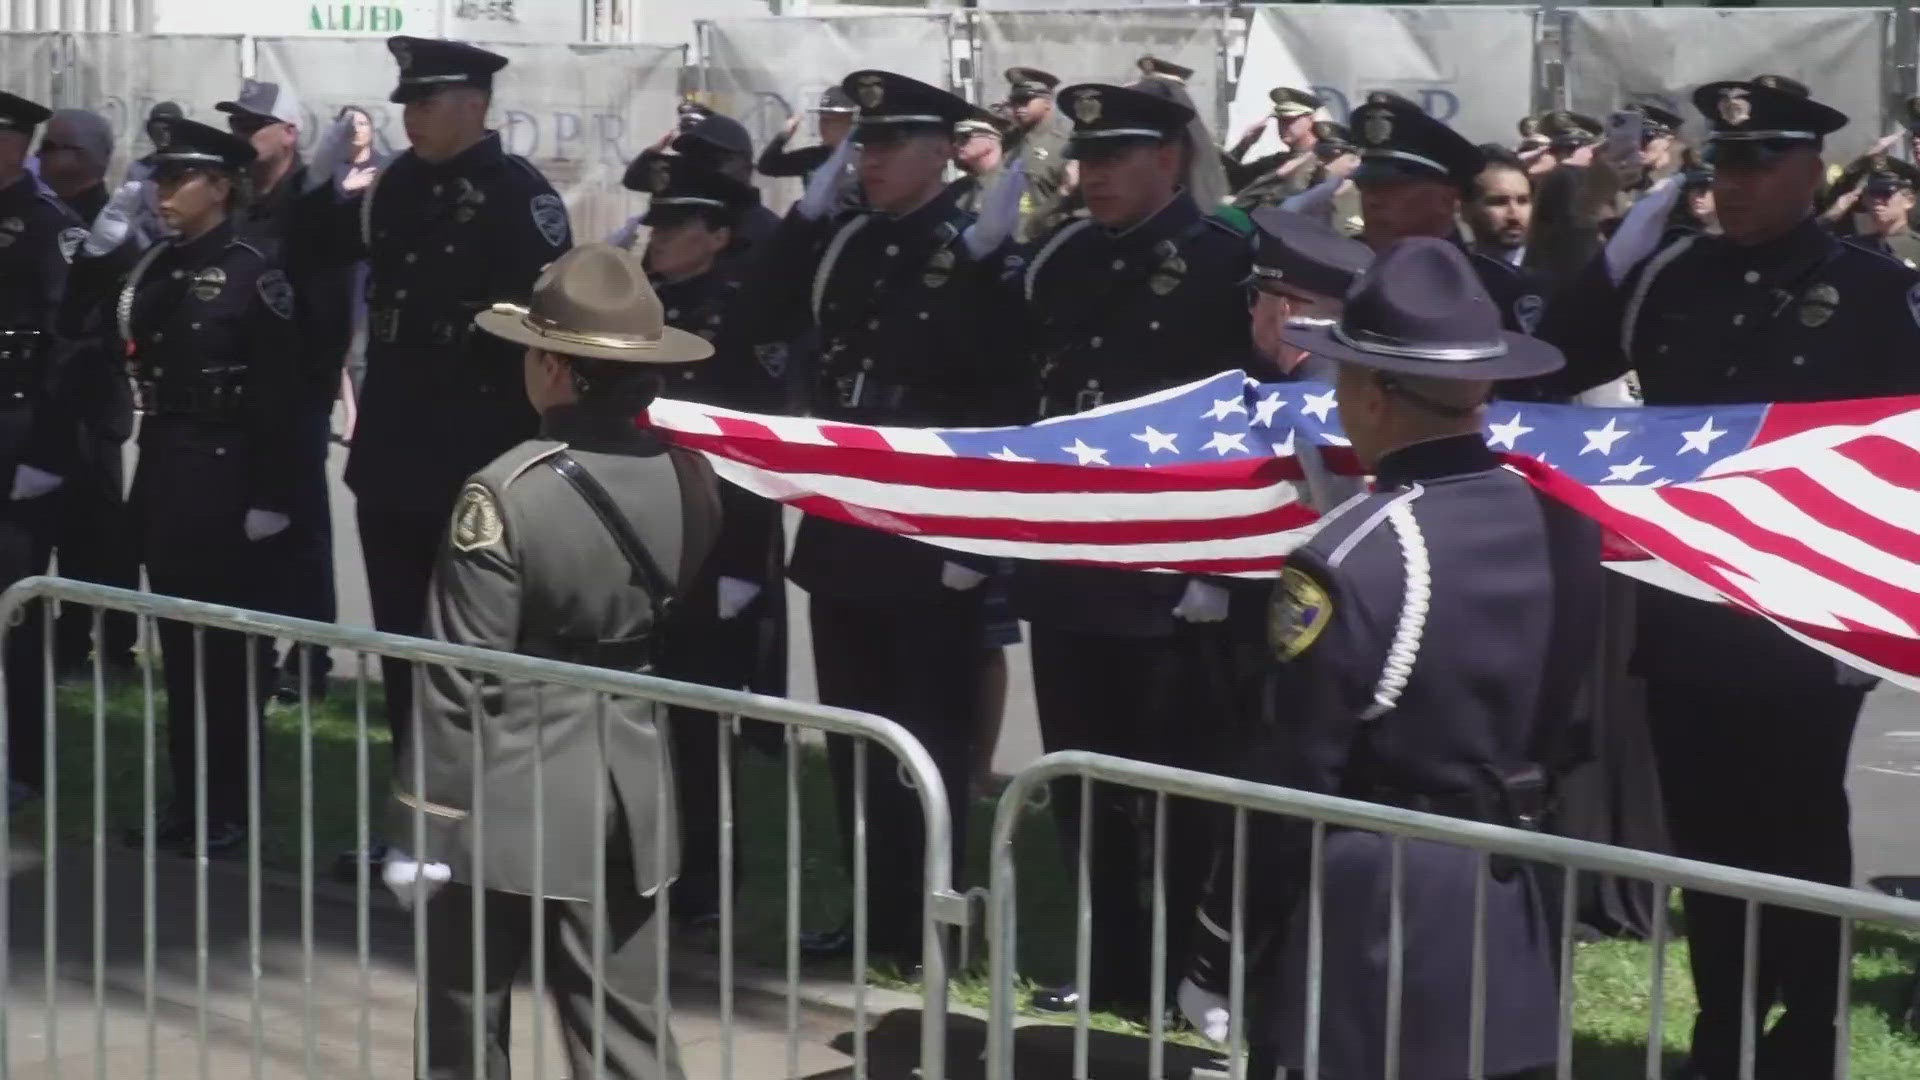 Here's how Sacramento is honoring police officers during National Police Week.